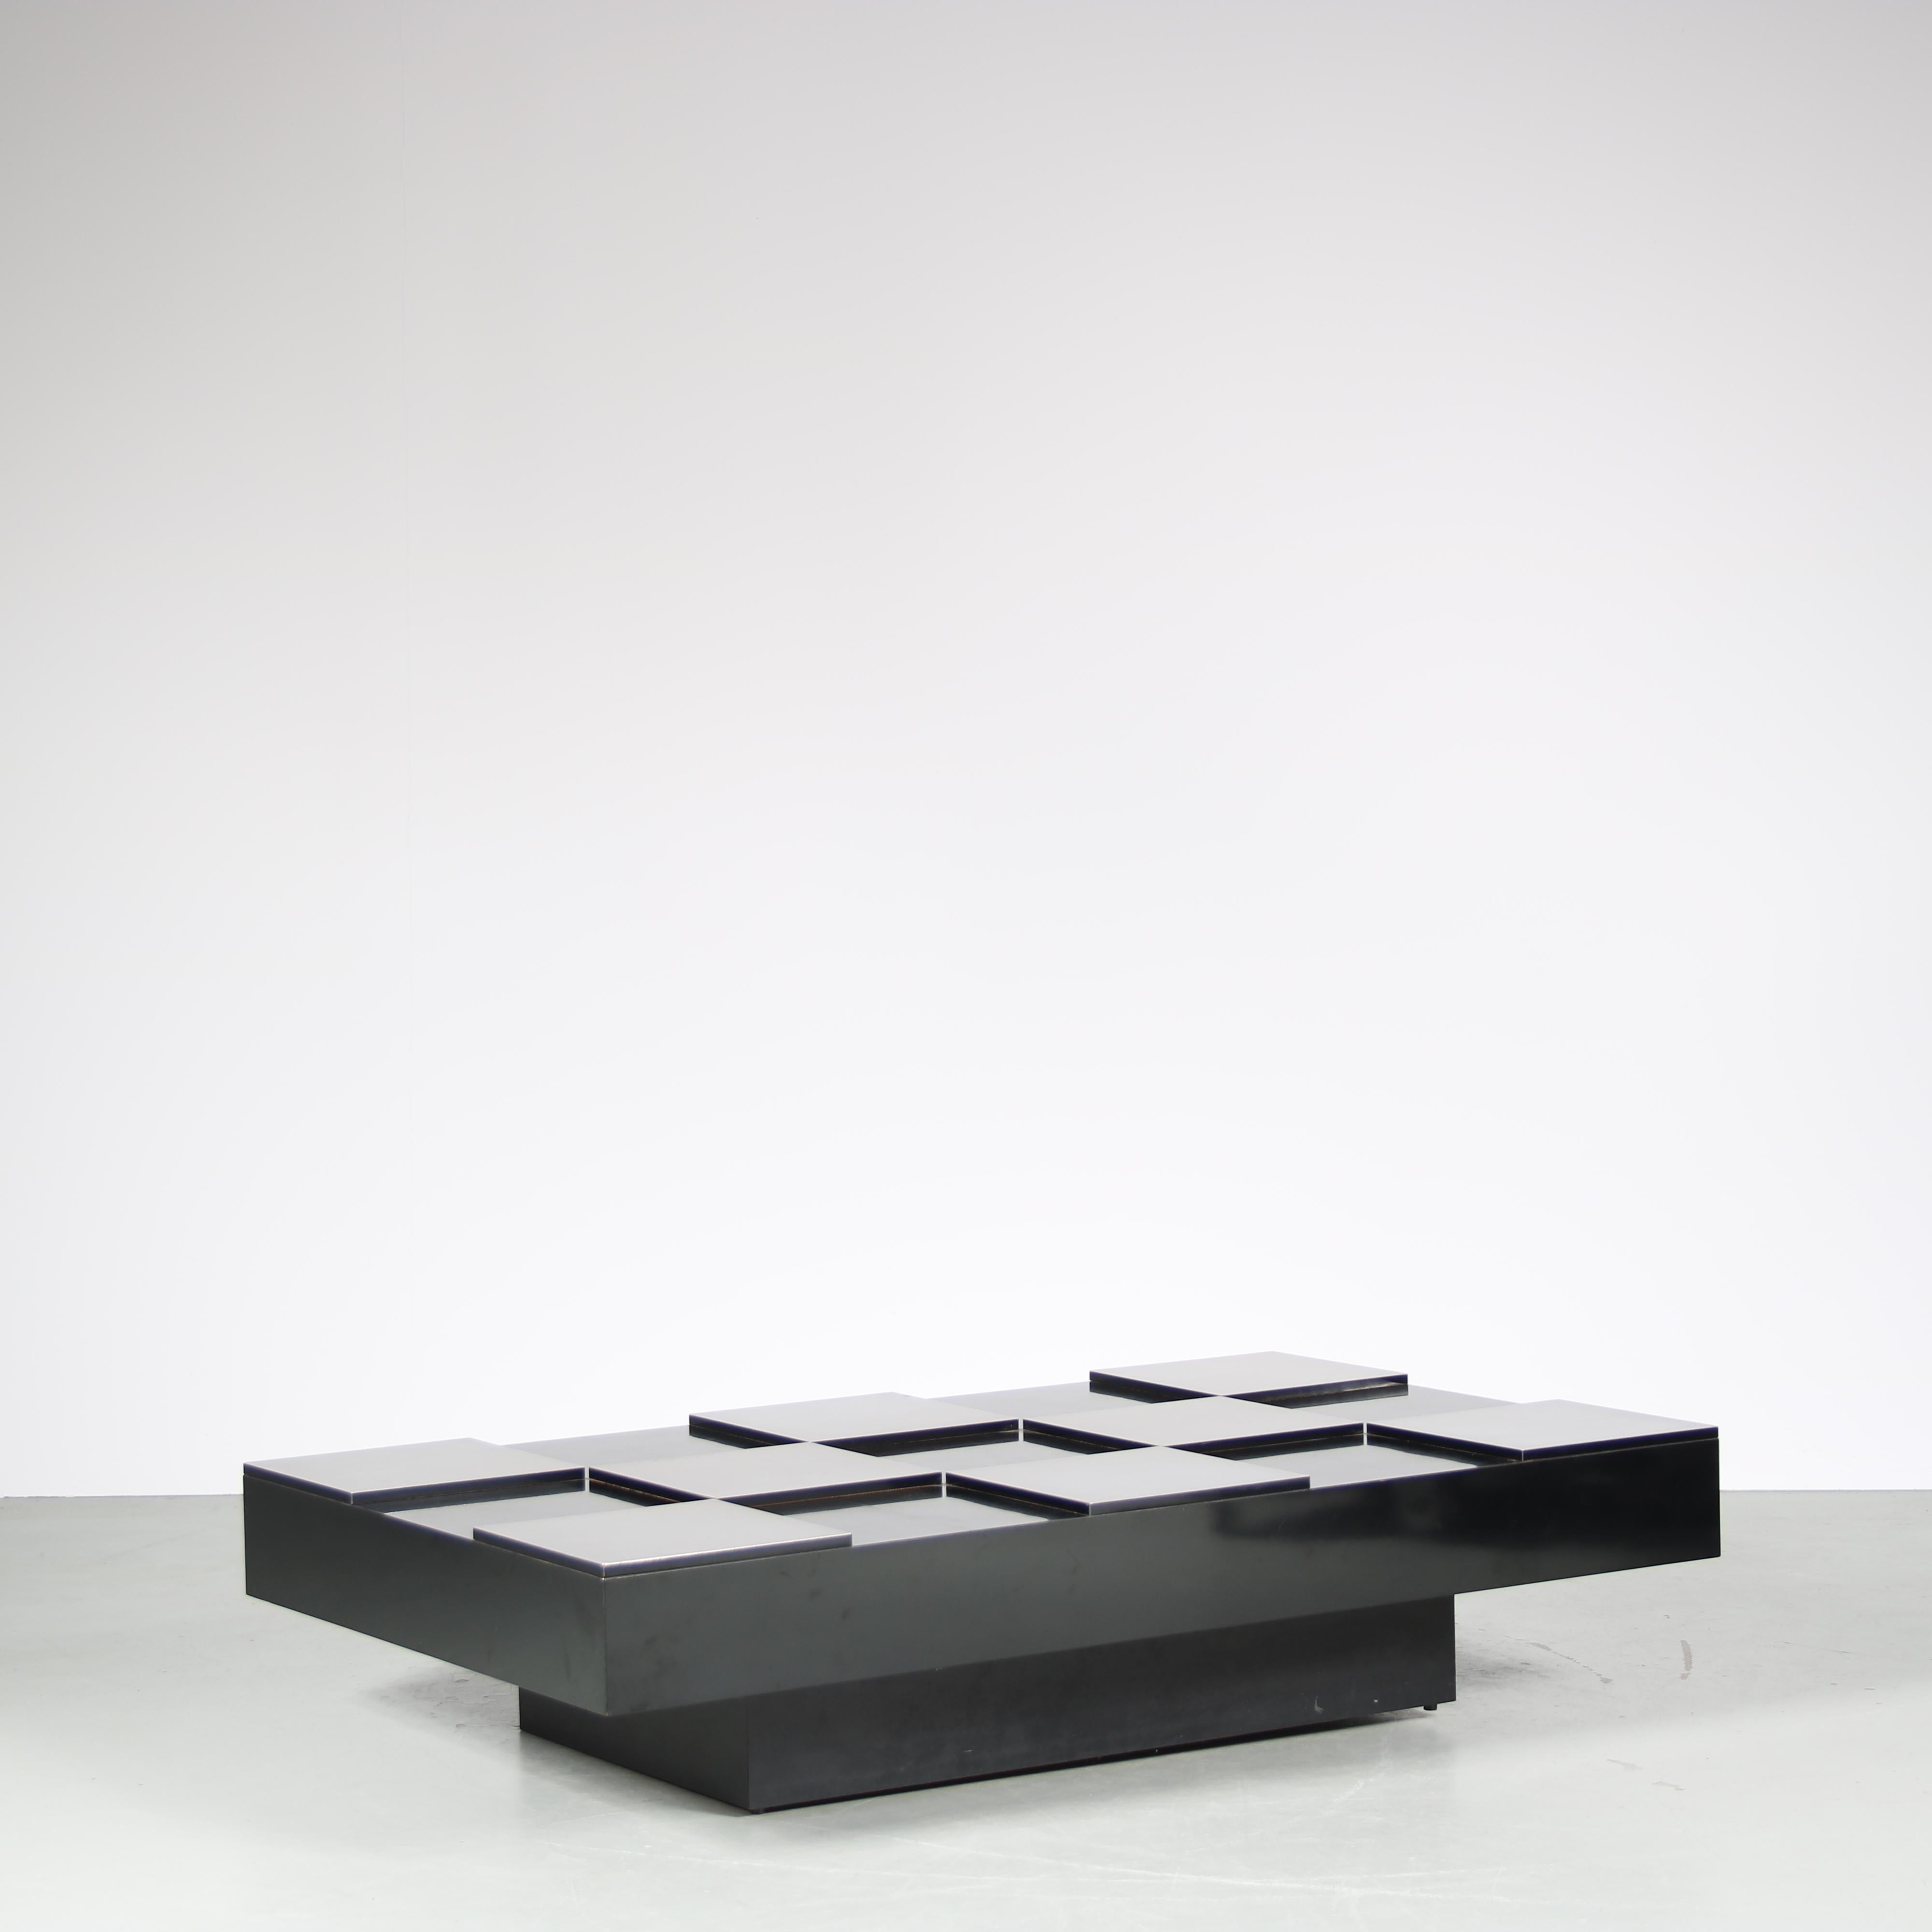 A rare “checkerboard” coffee table designed by Willy Rizzo, manufactured in Italy around 1970.

This wonderful piece is made of high quality black laminated wood with bright aluminium. The materials are combined into a checkered pattern to the top